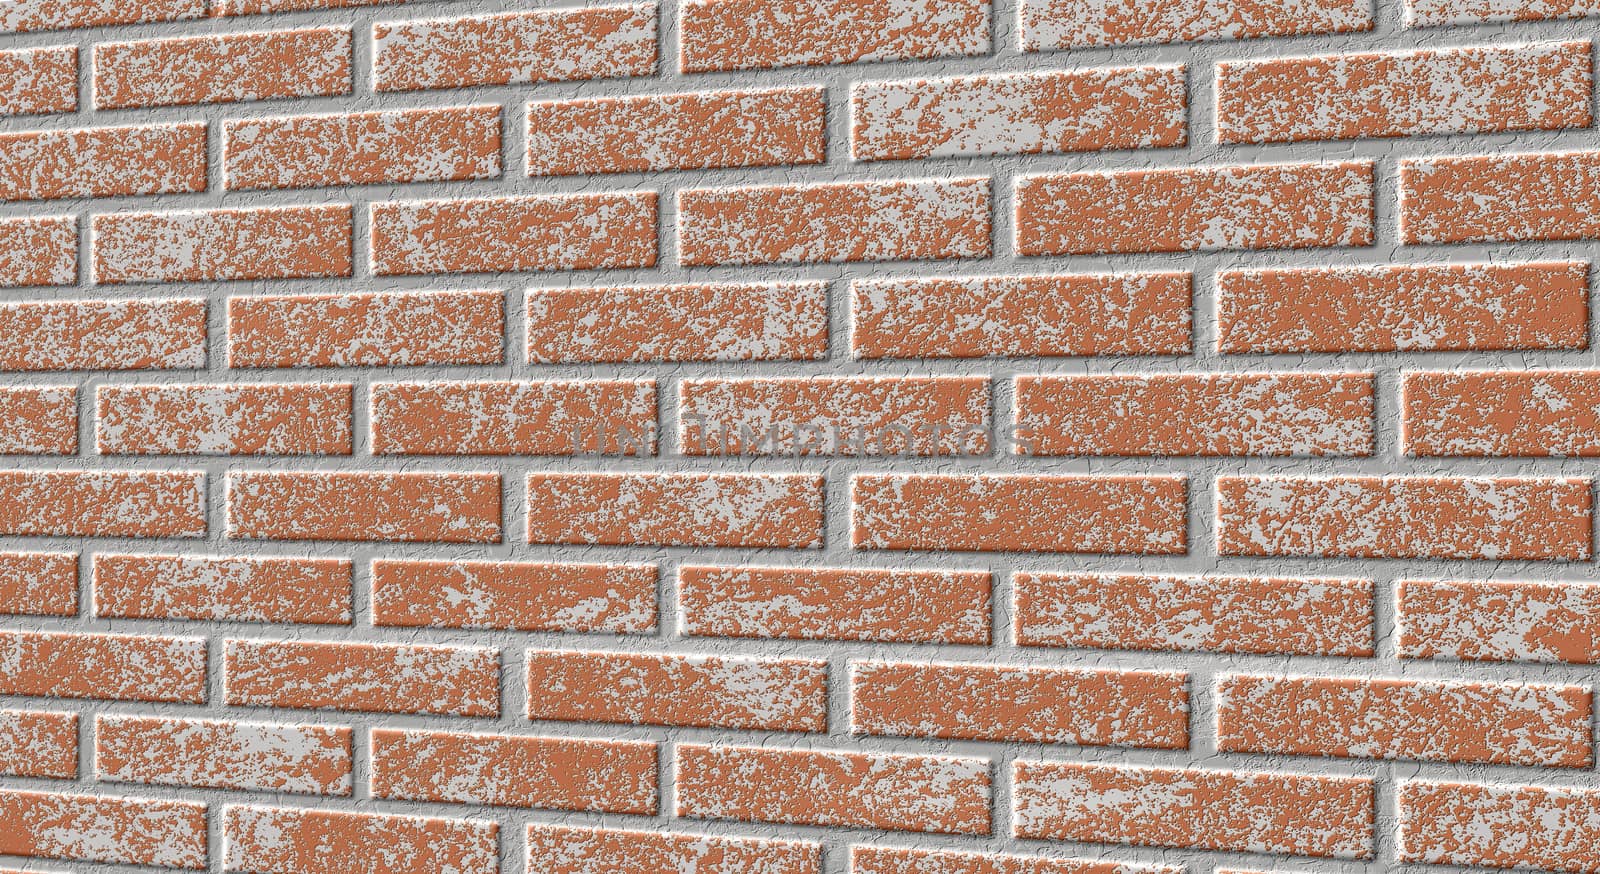 Brick wall. Brown textured background. Pattern of decorative wall surface